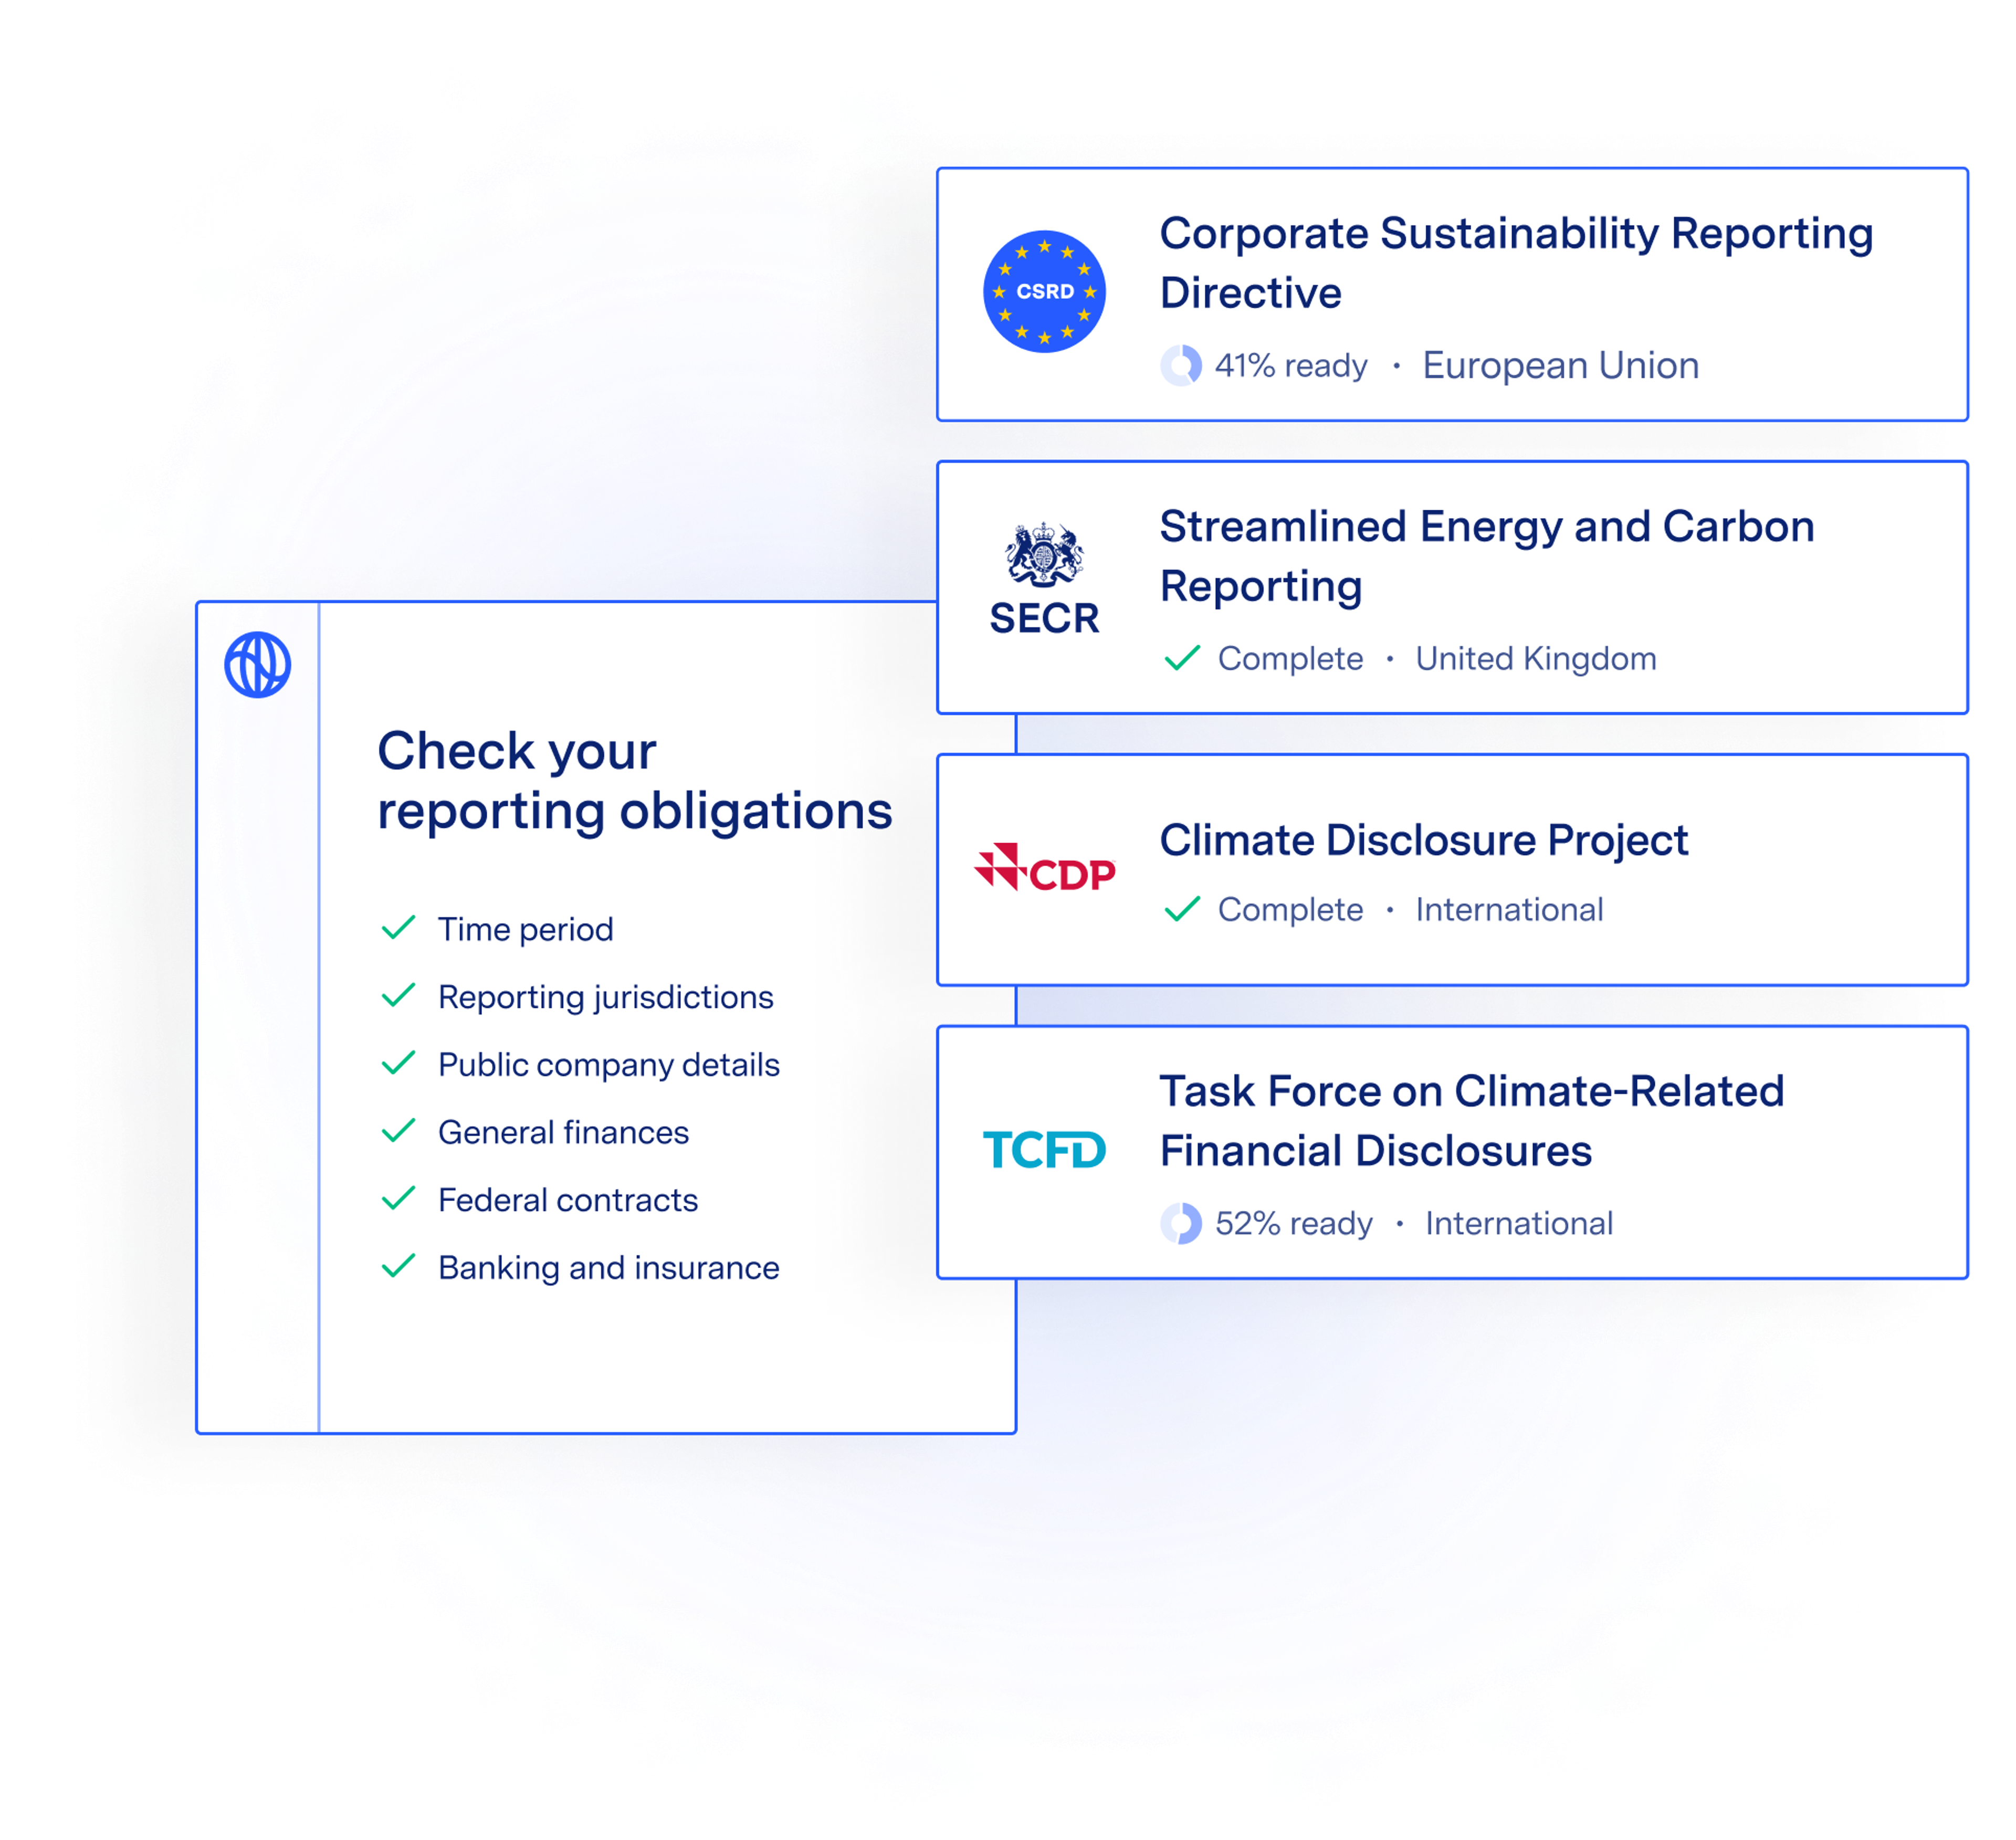 The Watershed CSRD disclosure reporting tool